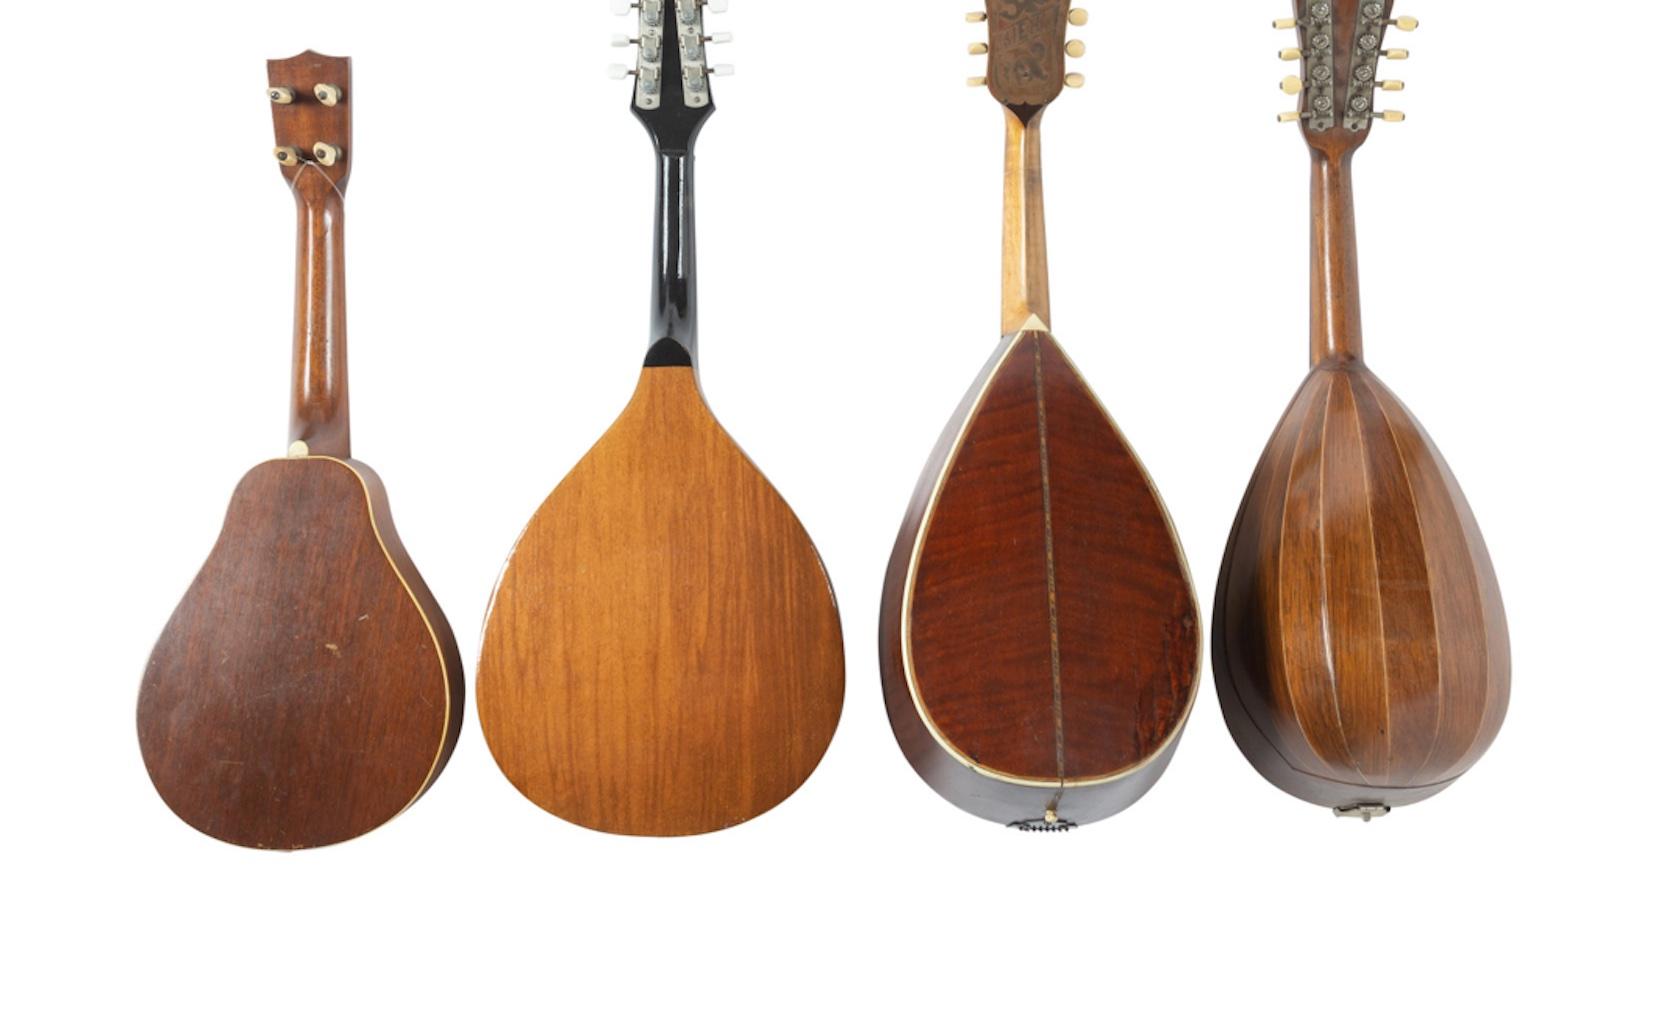 Collection Of Four Mandolins, Some With Inlay Tortoiseshelle, Satin Wood. Great Pieces For Art Work. Sizes Vary. Property from the Estate of Fred and Estelle Spector, Chicago, Illinois He was a member of the Chicago Symphony Orchestra for 47 years